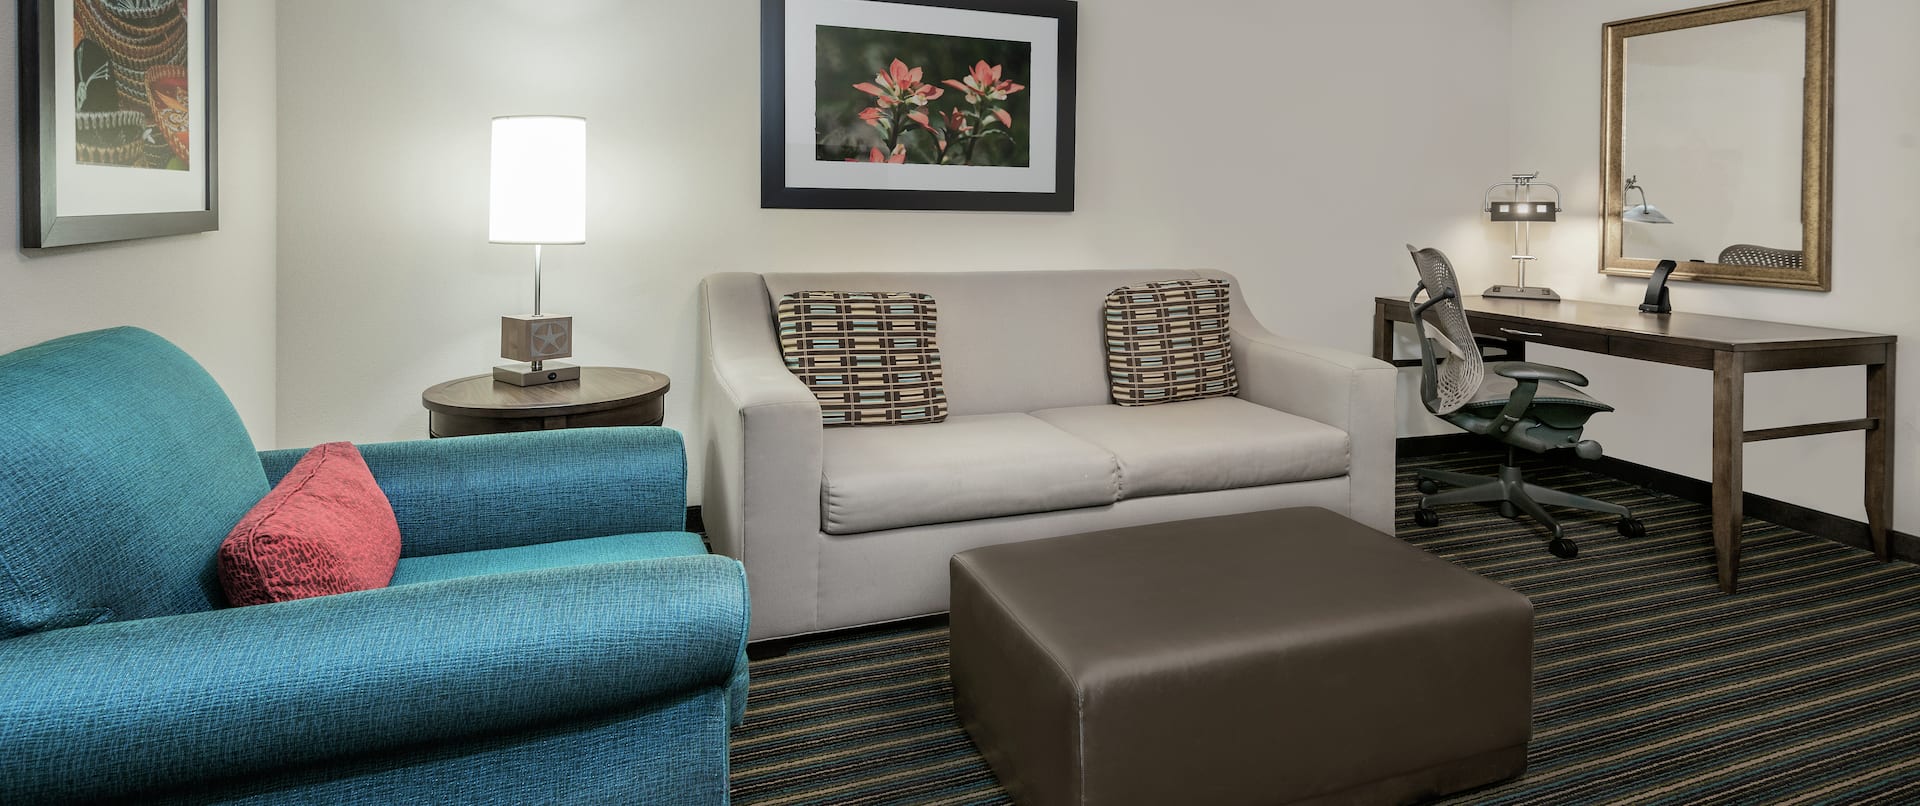 Guest Suite Lounge Area with Sofa and Work Desk